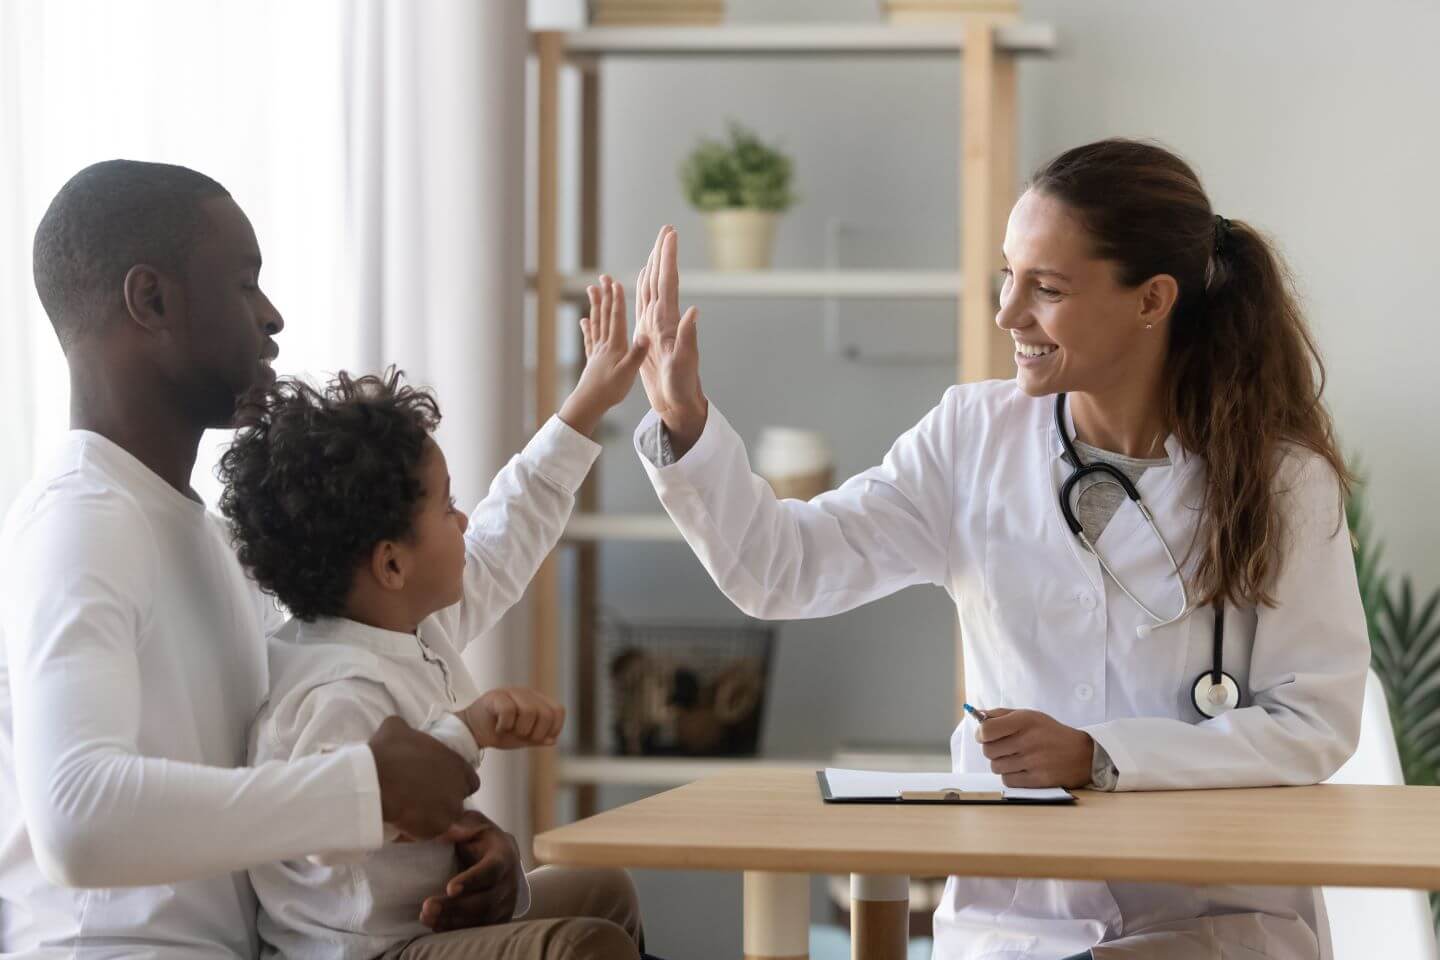 nurse practitioner NP high fiving a young male patient sitting with his father